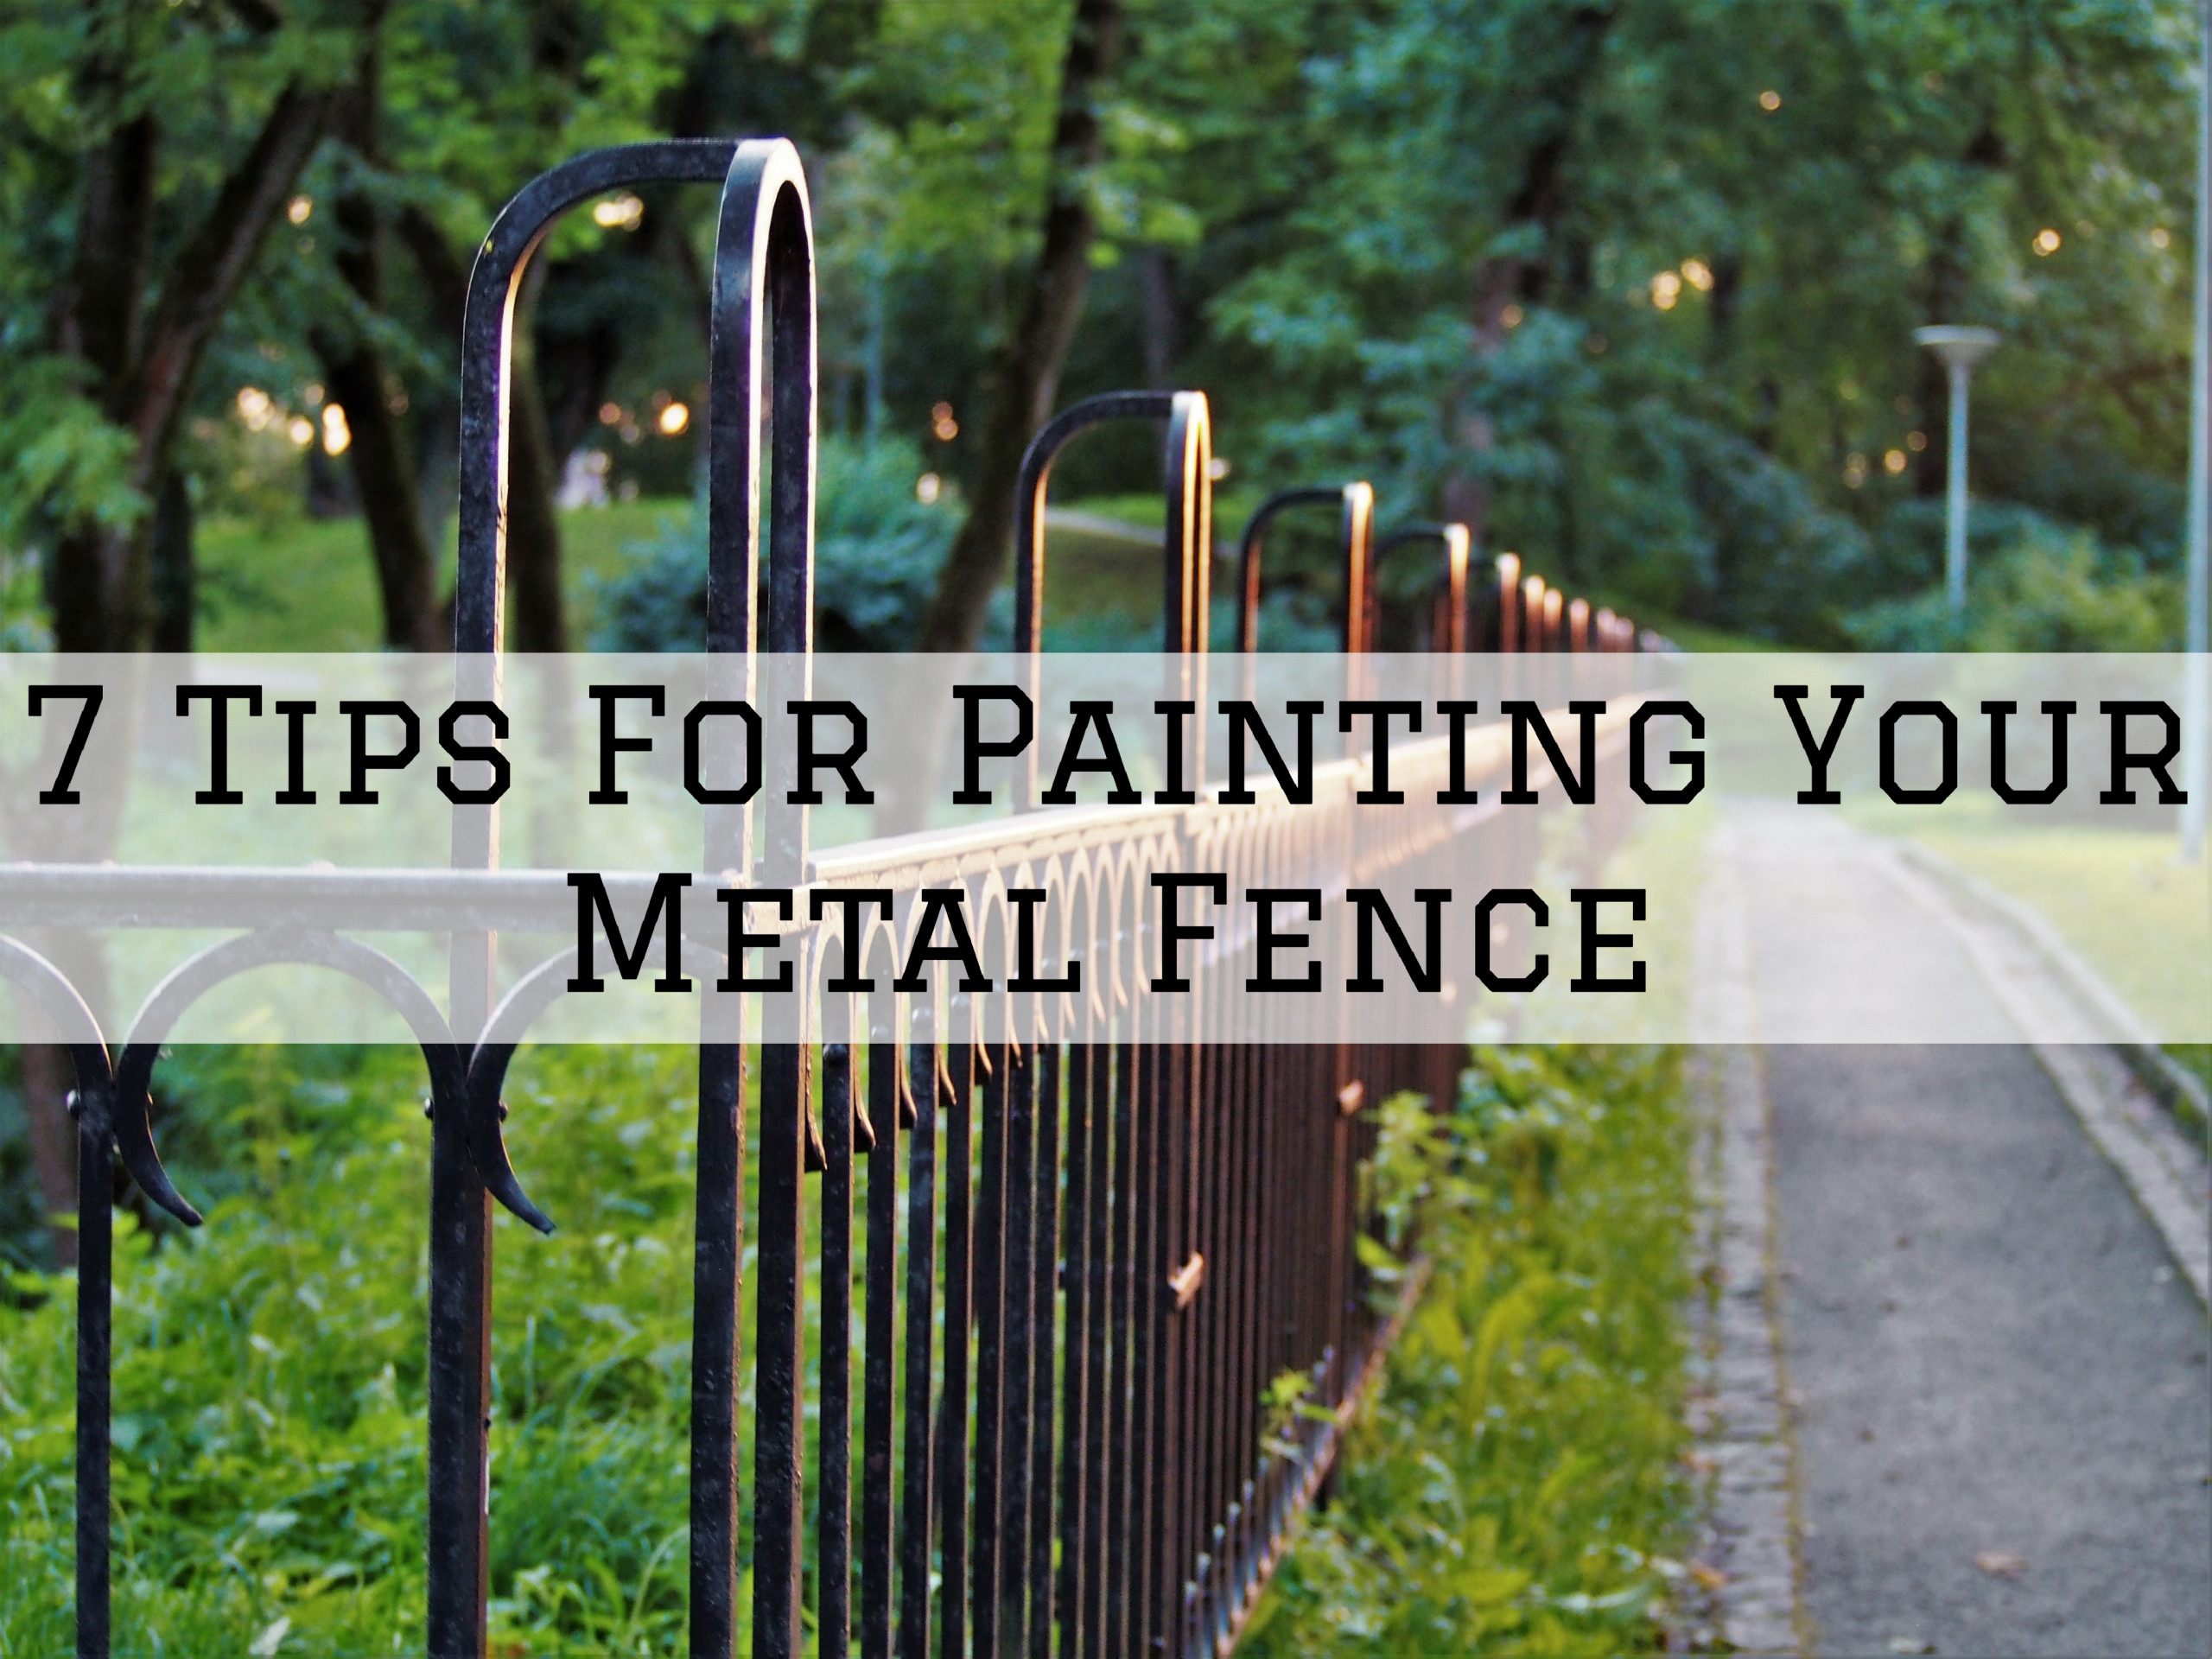 28-06-2021 Steves Quality Painting And Washing Princeton WI tips for painting a metal fence